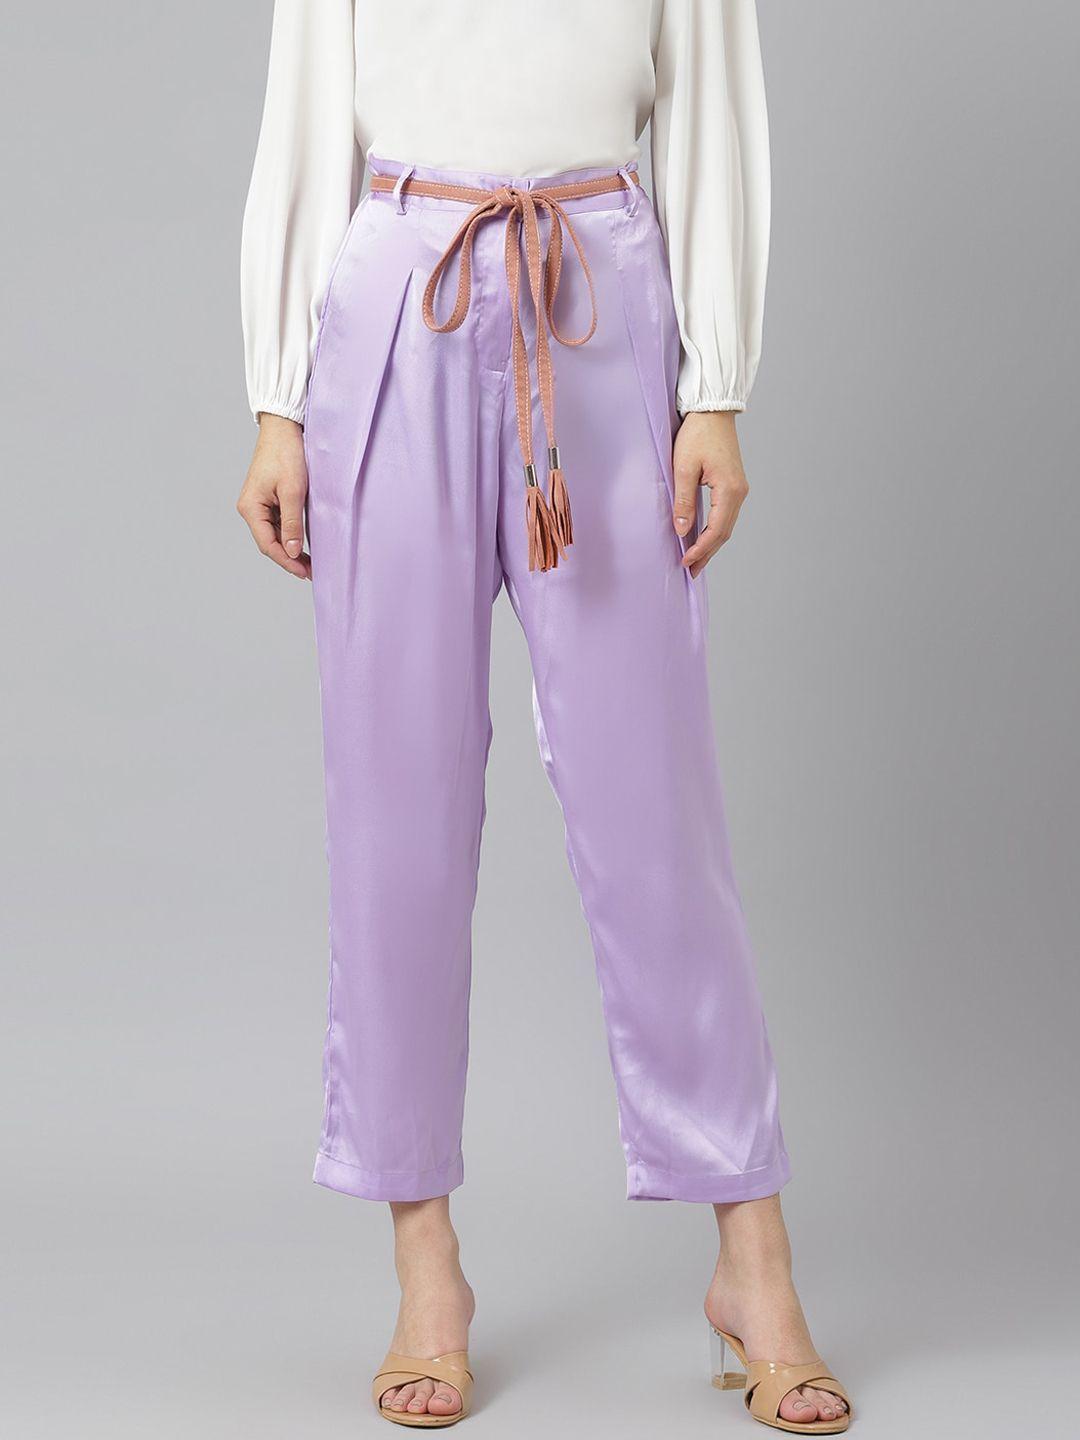 am ma women lavender pleated peg trousers with belt